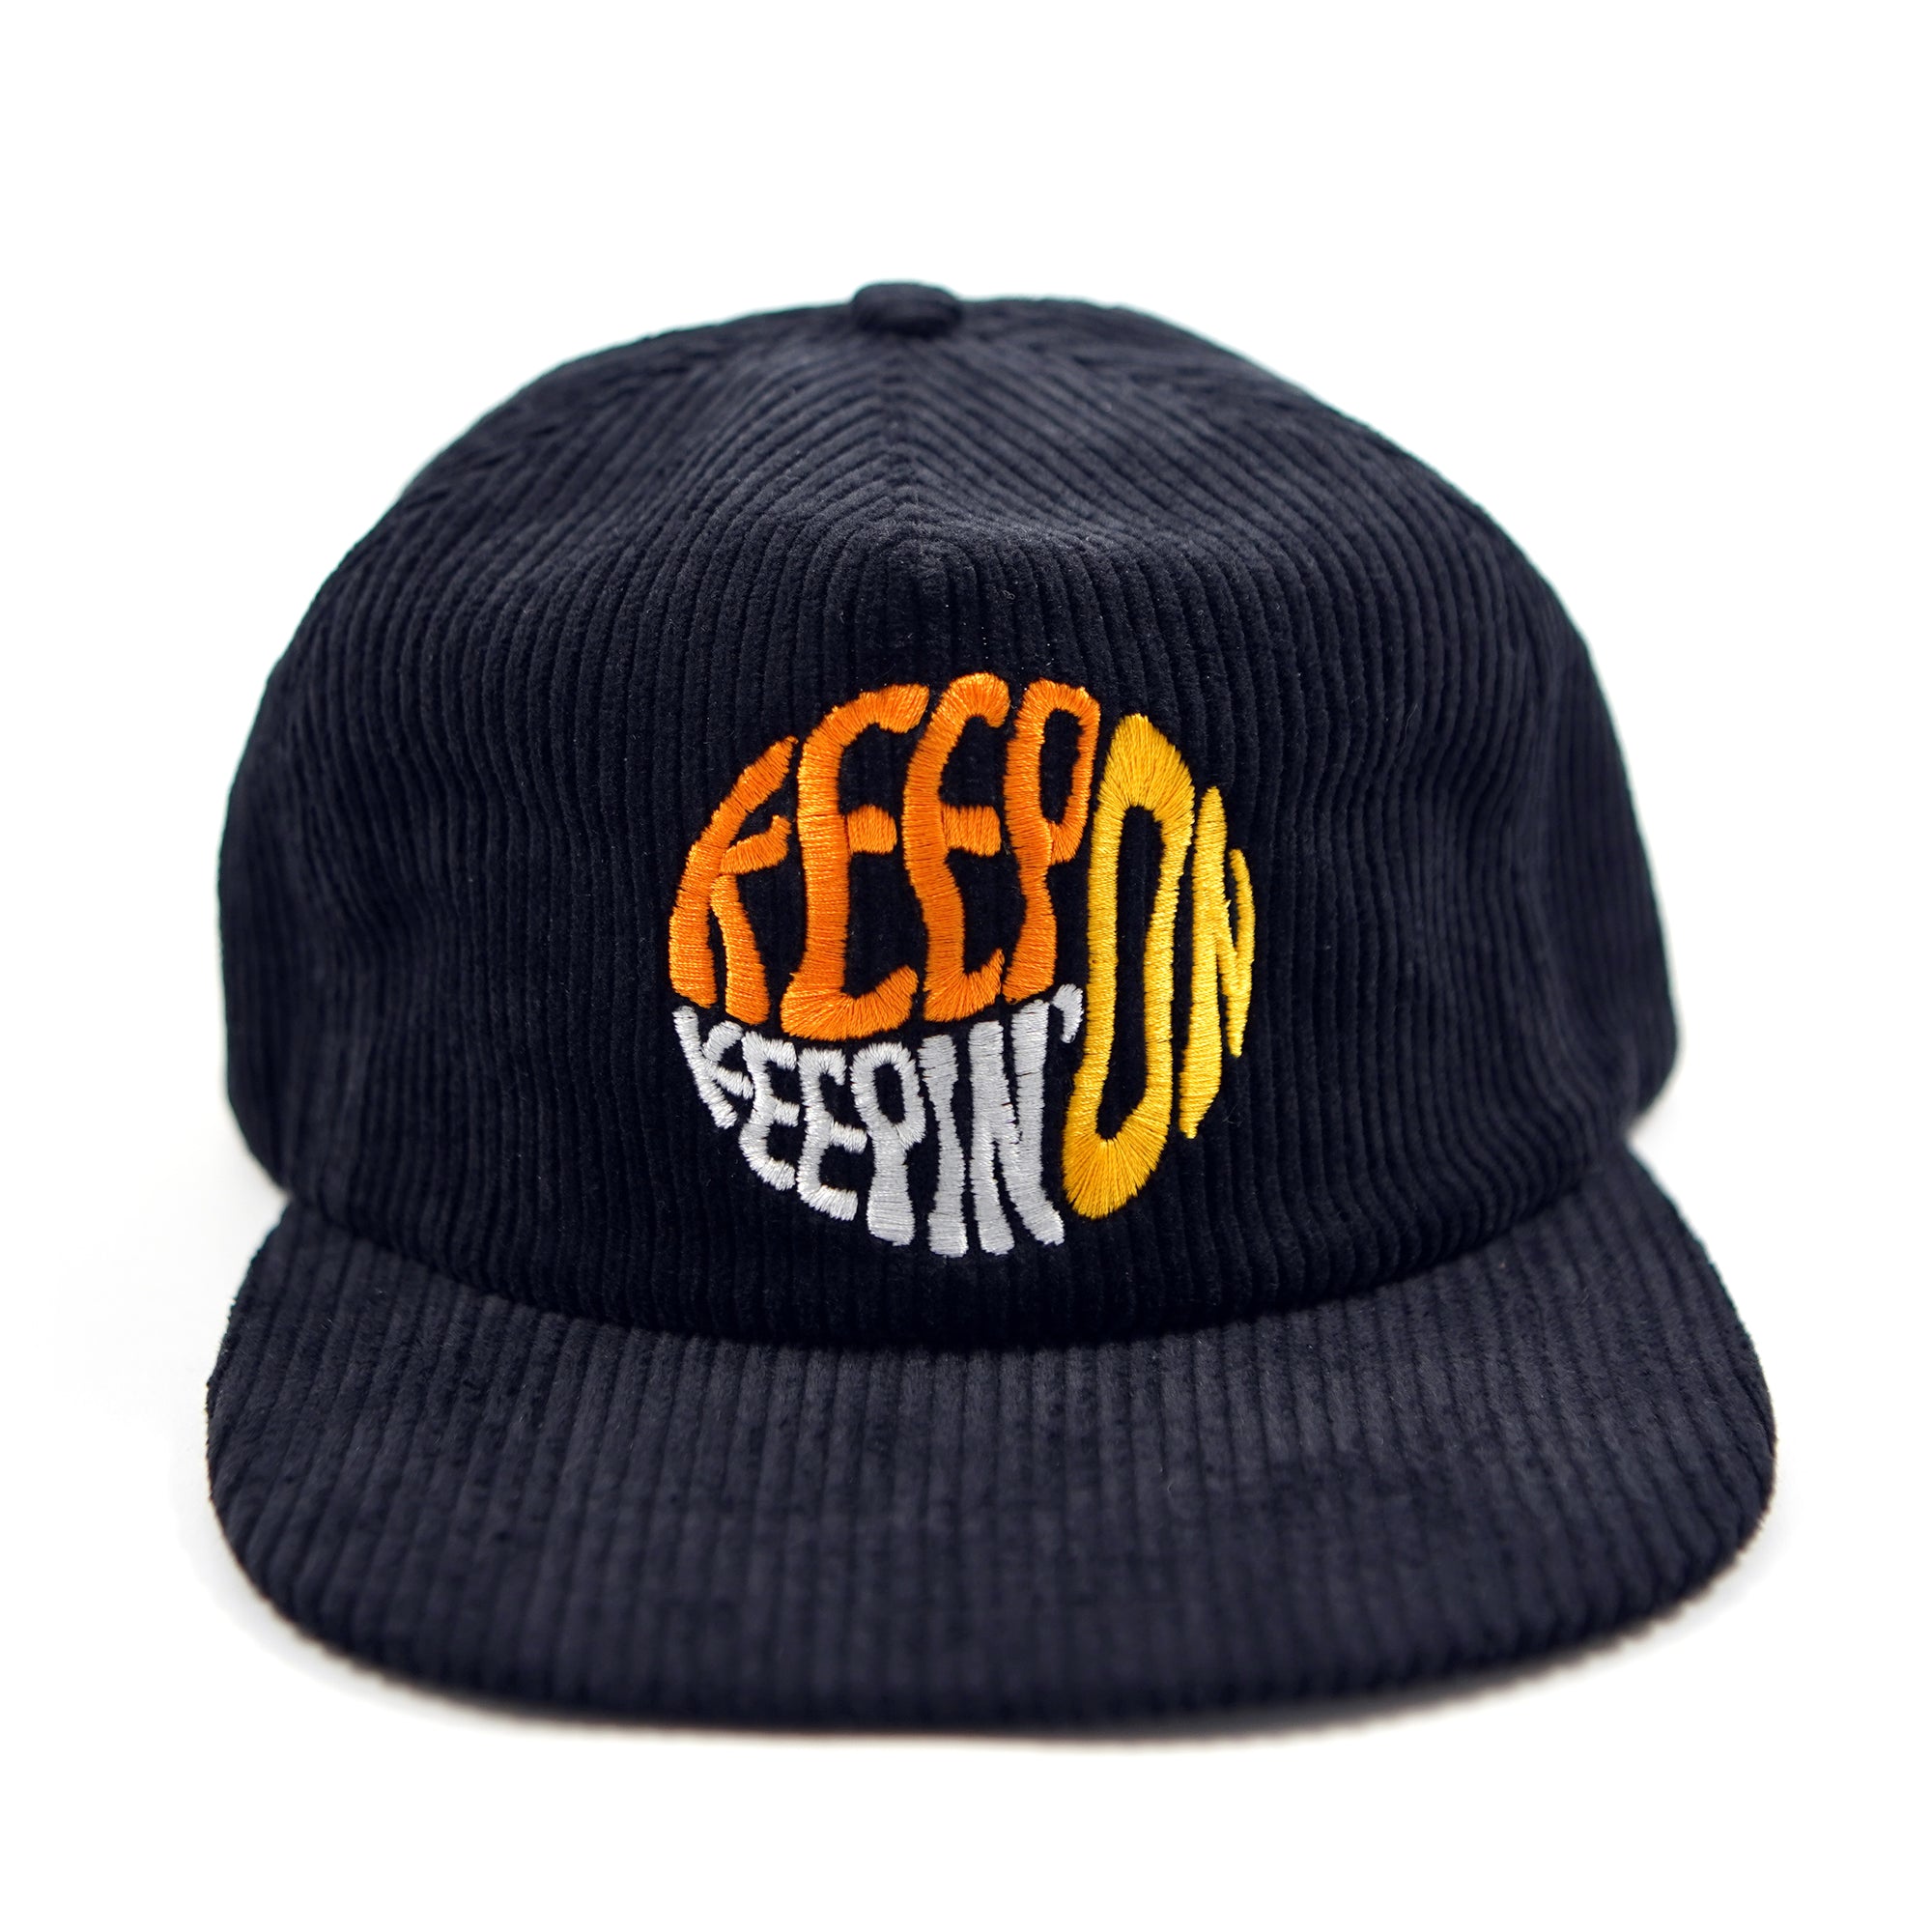 Keep On Keepin' On Black Corduroy Hat 70s Style Psychedelic